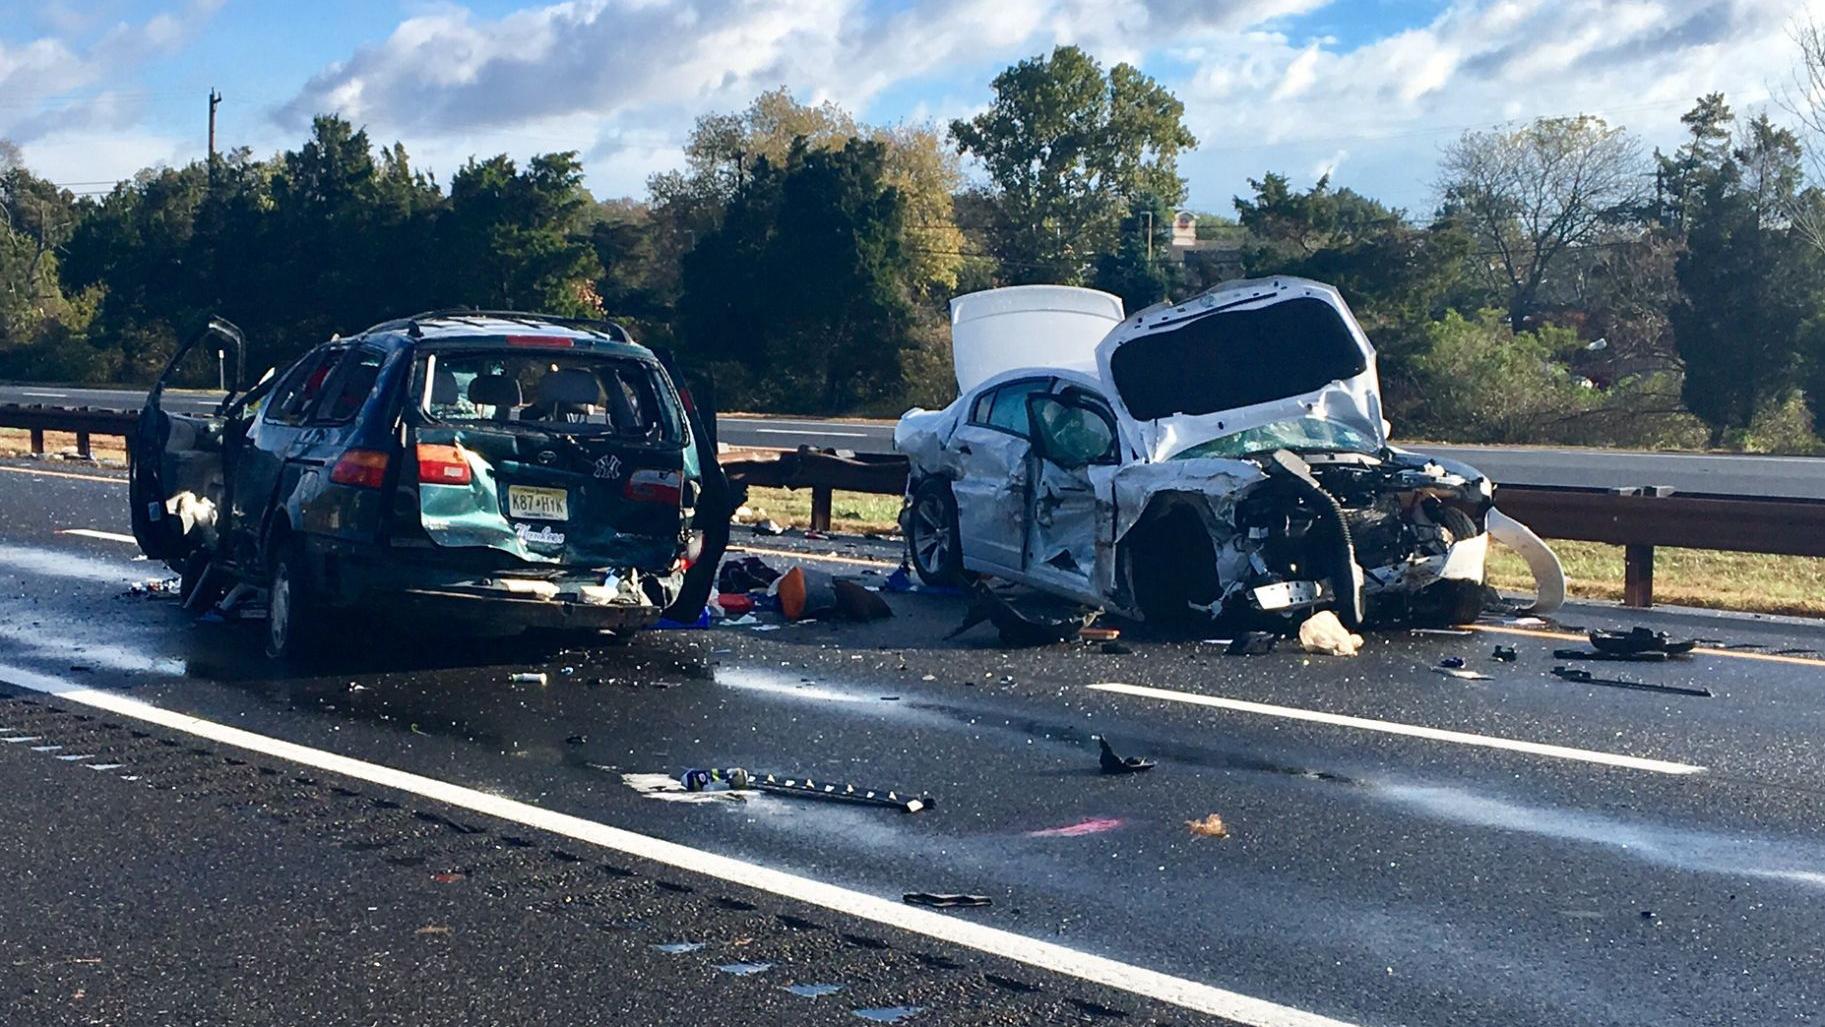 22 Garden state parkway south accident reports information